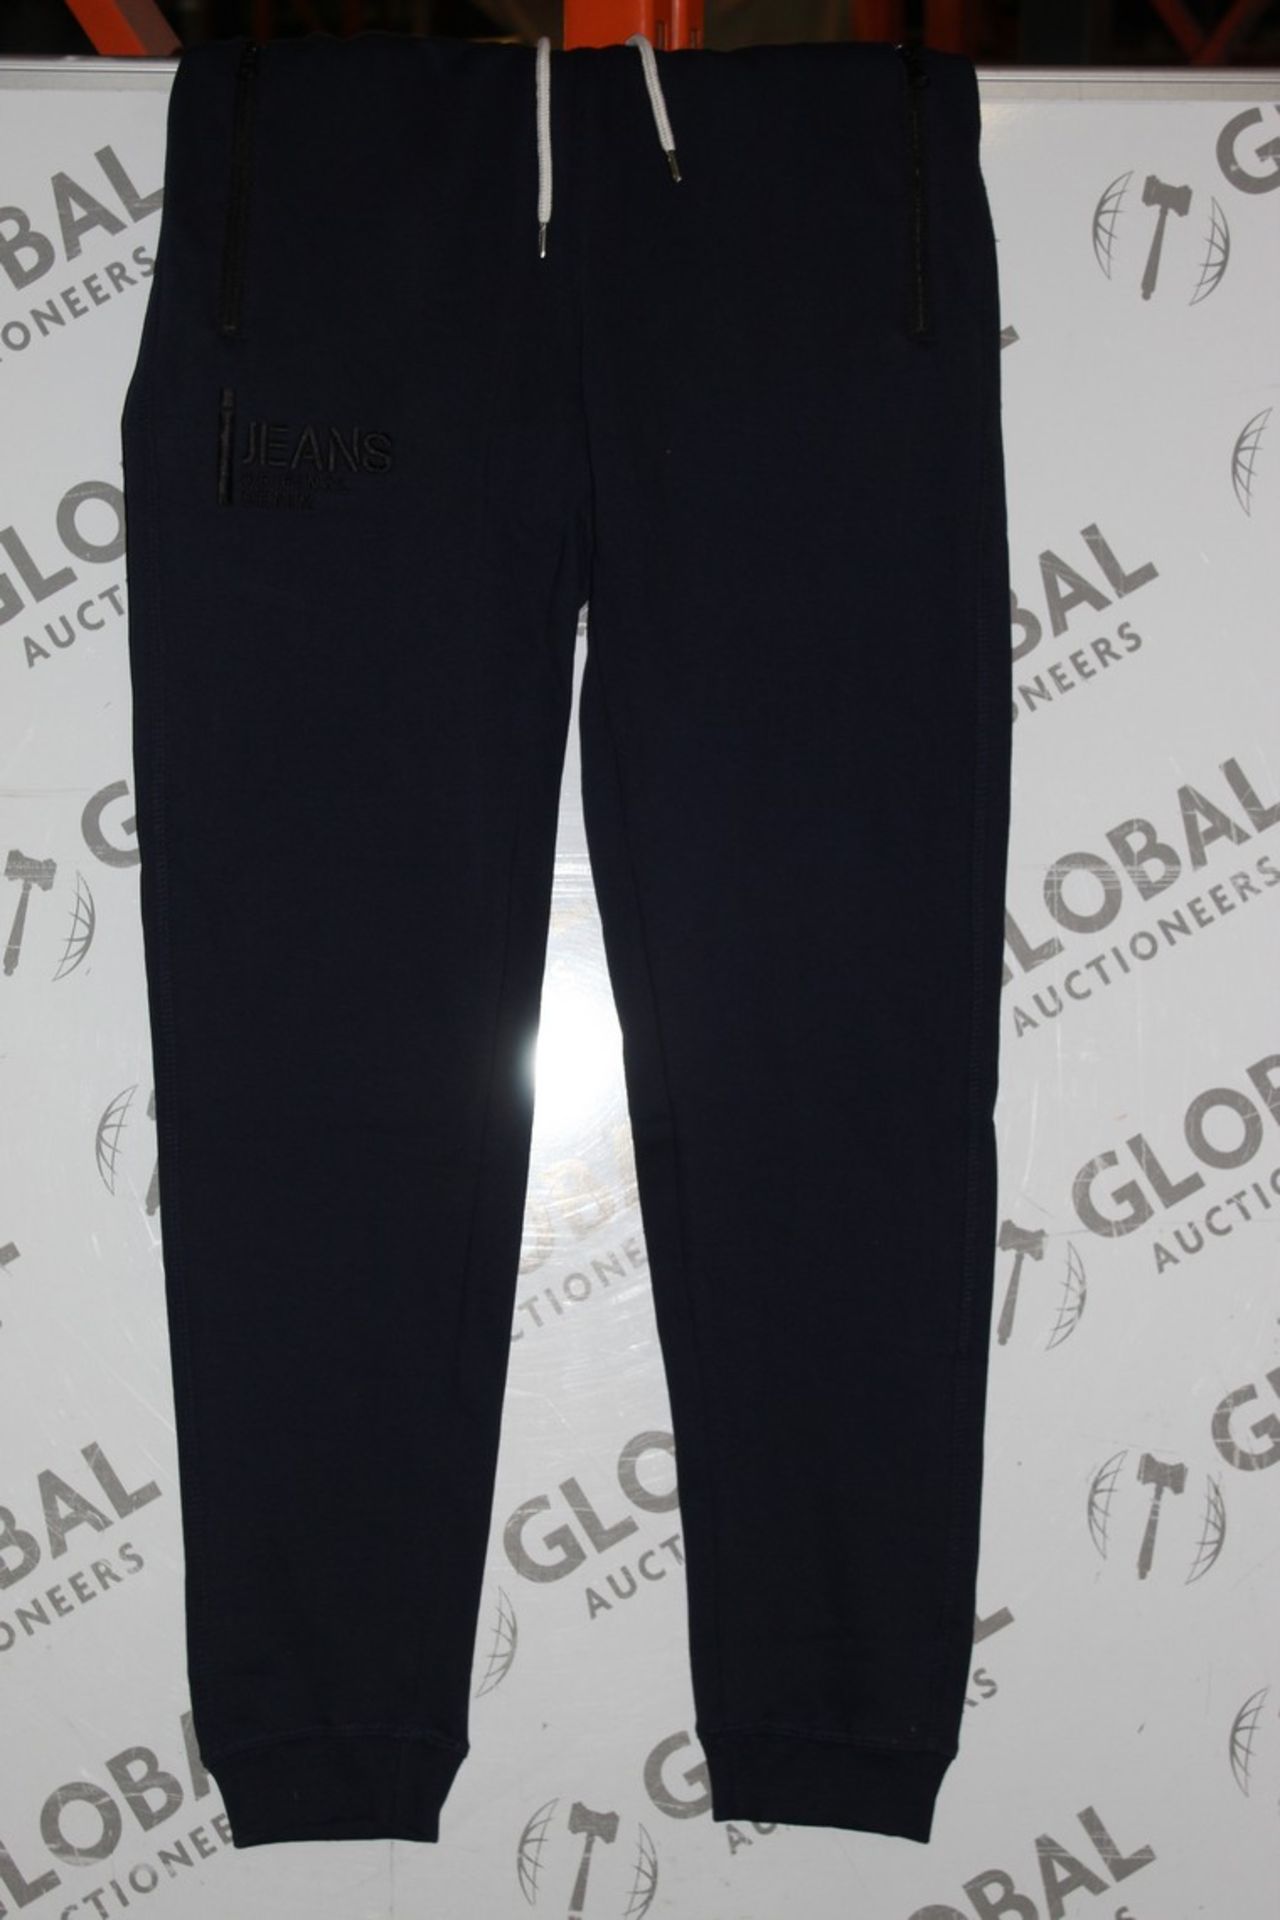 Lot to Contain 20 Brand New Pairs of Ijeans Original Denim Navy Blue Zip Pocket Lounging Pants